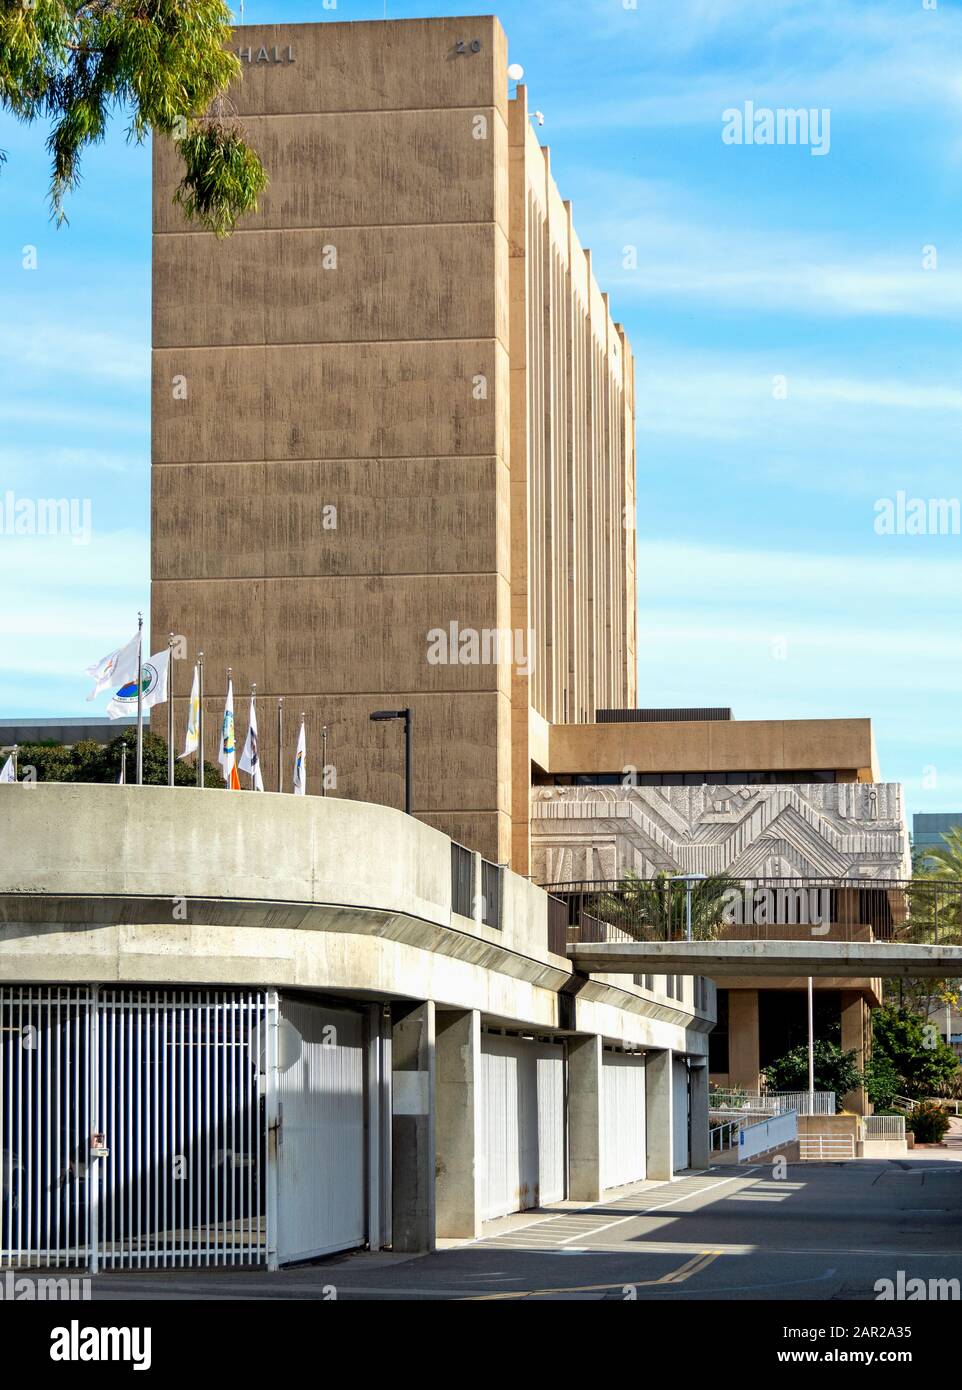 Santa Ana's New City Hall, a monolith of raw concrete built in the modern International style in the 1970's, is decorated with a carved stone border. Stock Photo